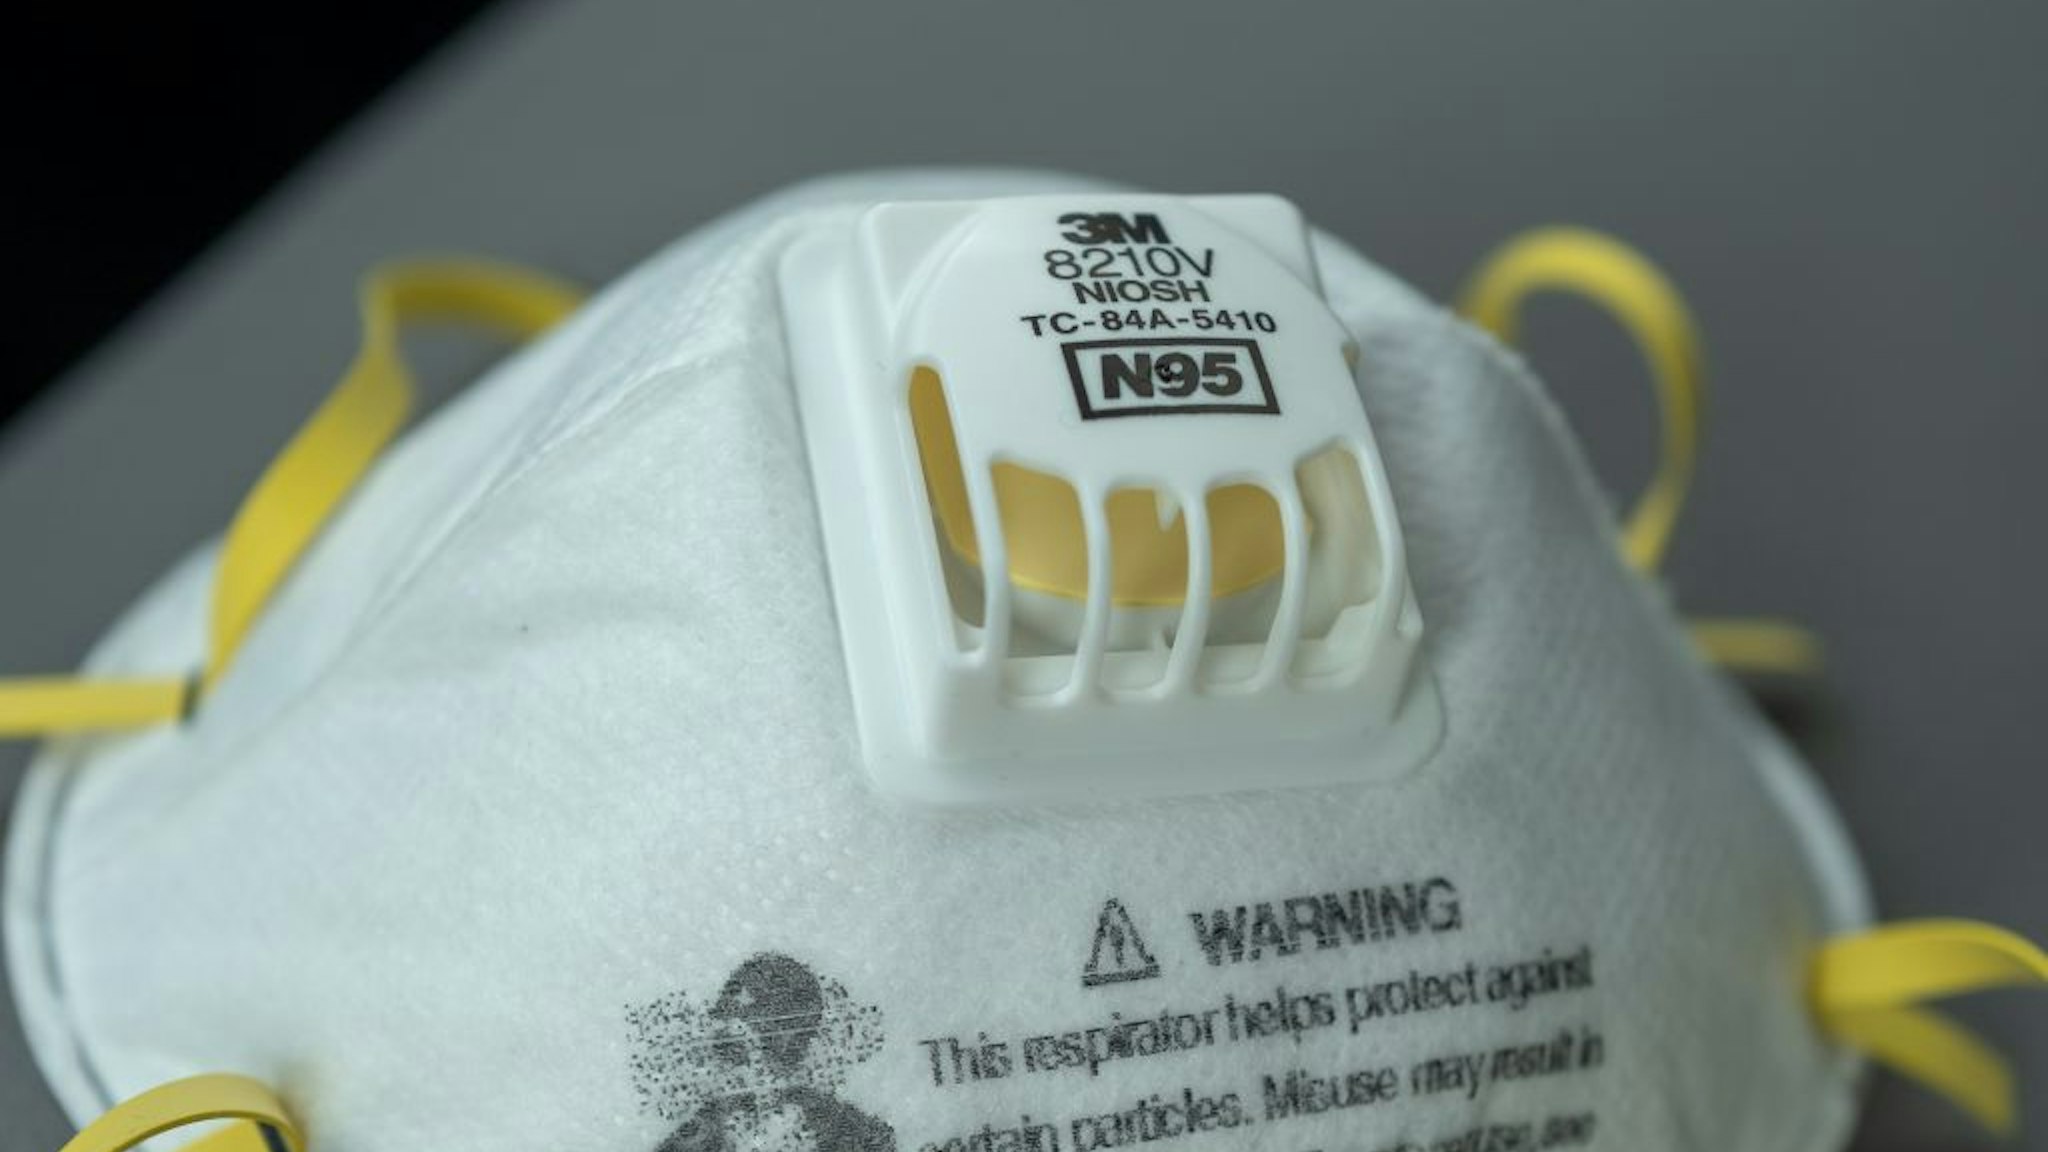 Close-up of N95 respirator mask during an outbreak of COVID-19 coronavirus, San Francisco, California, March 30, 2020.